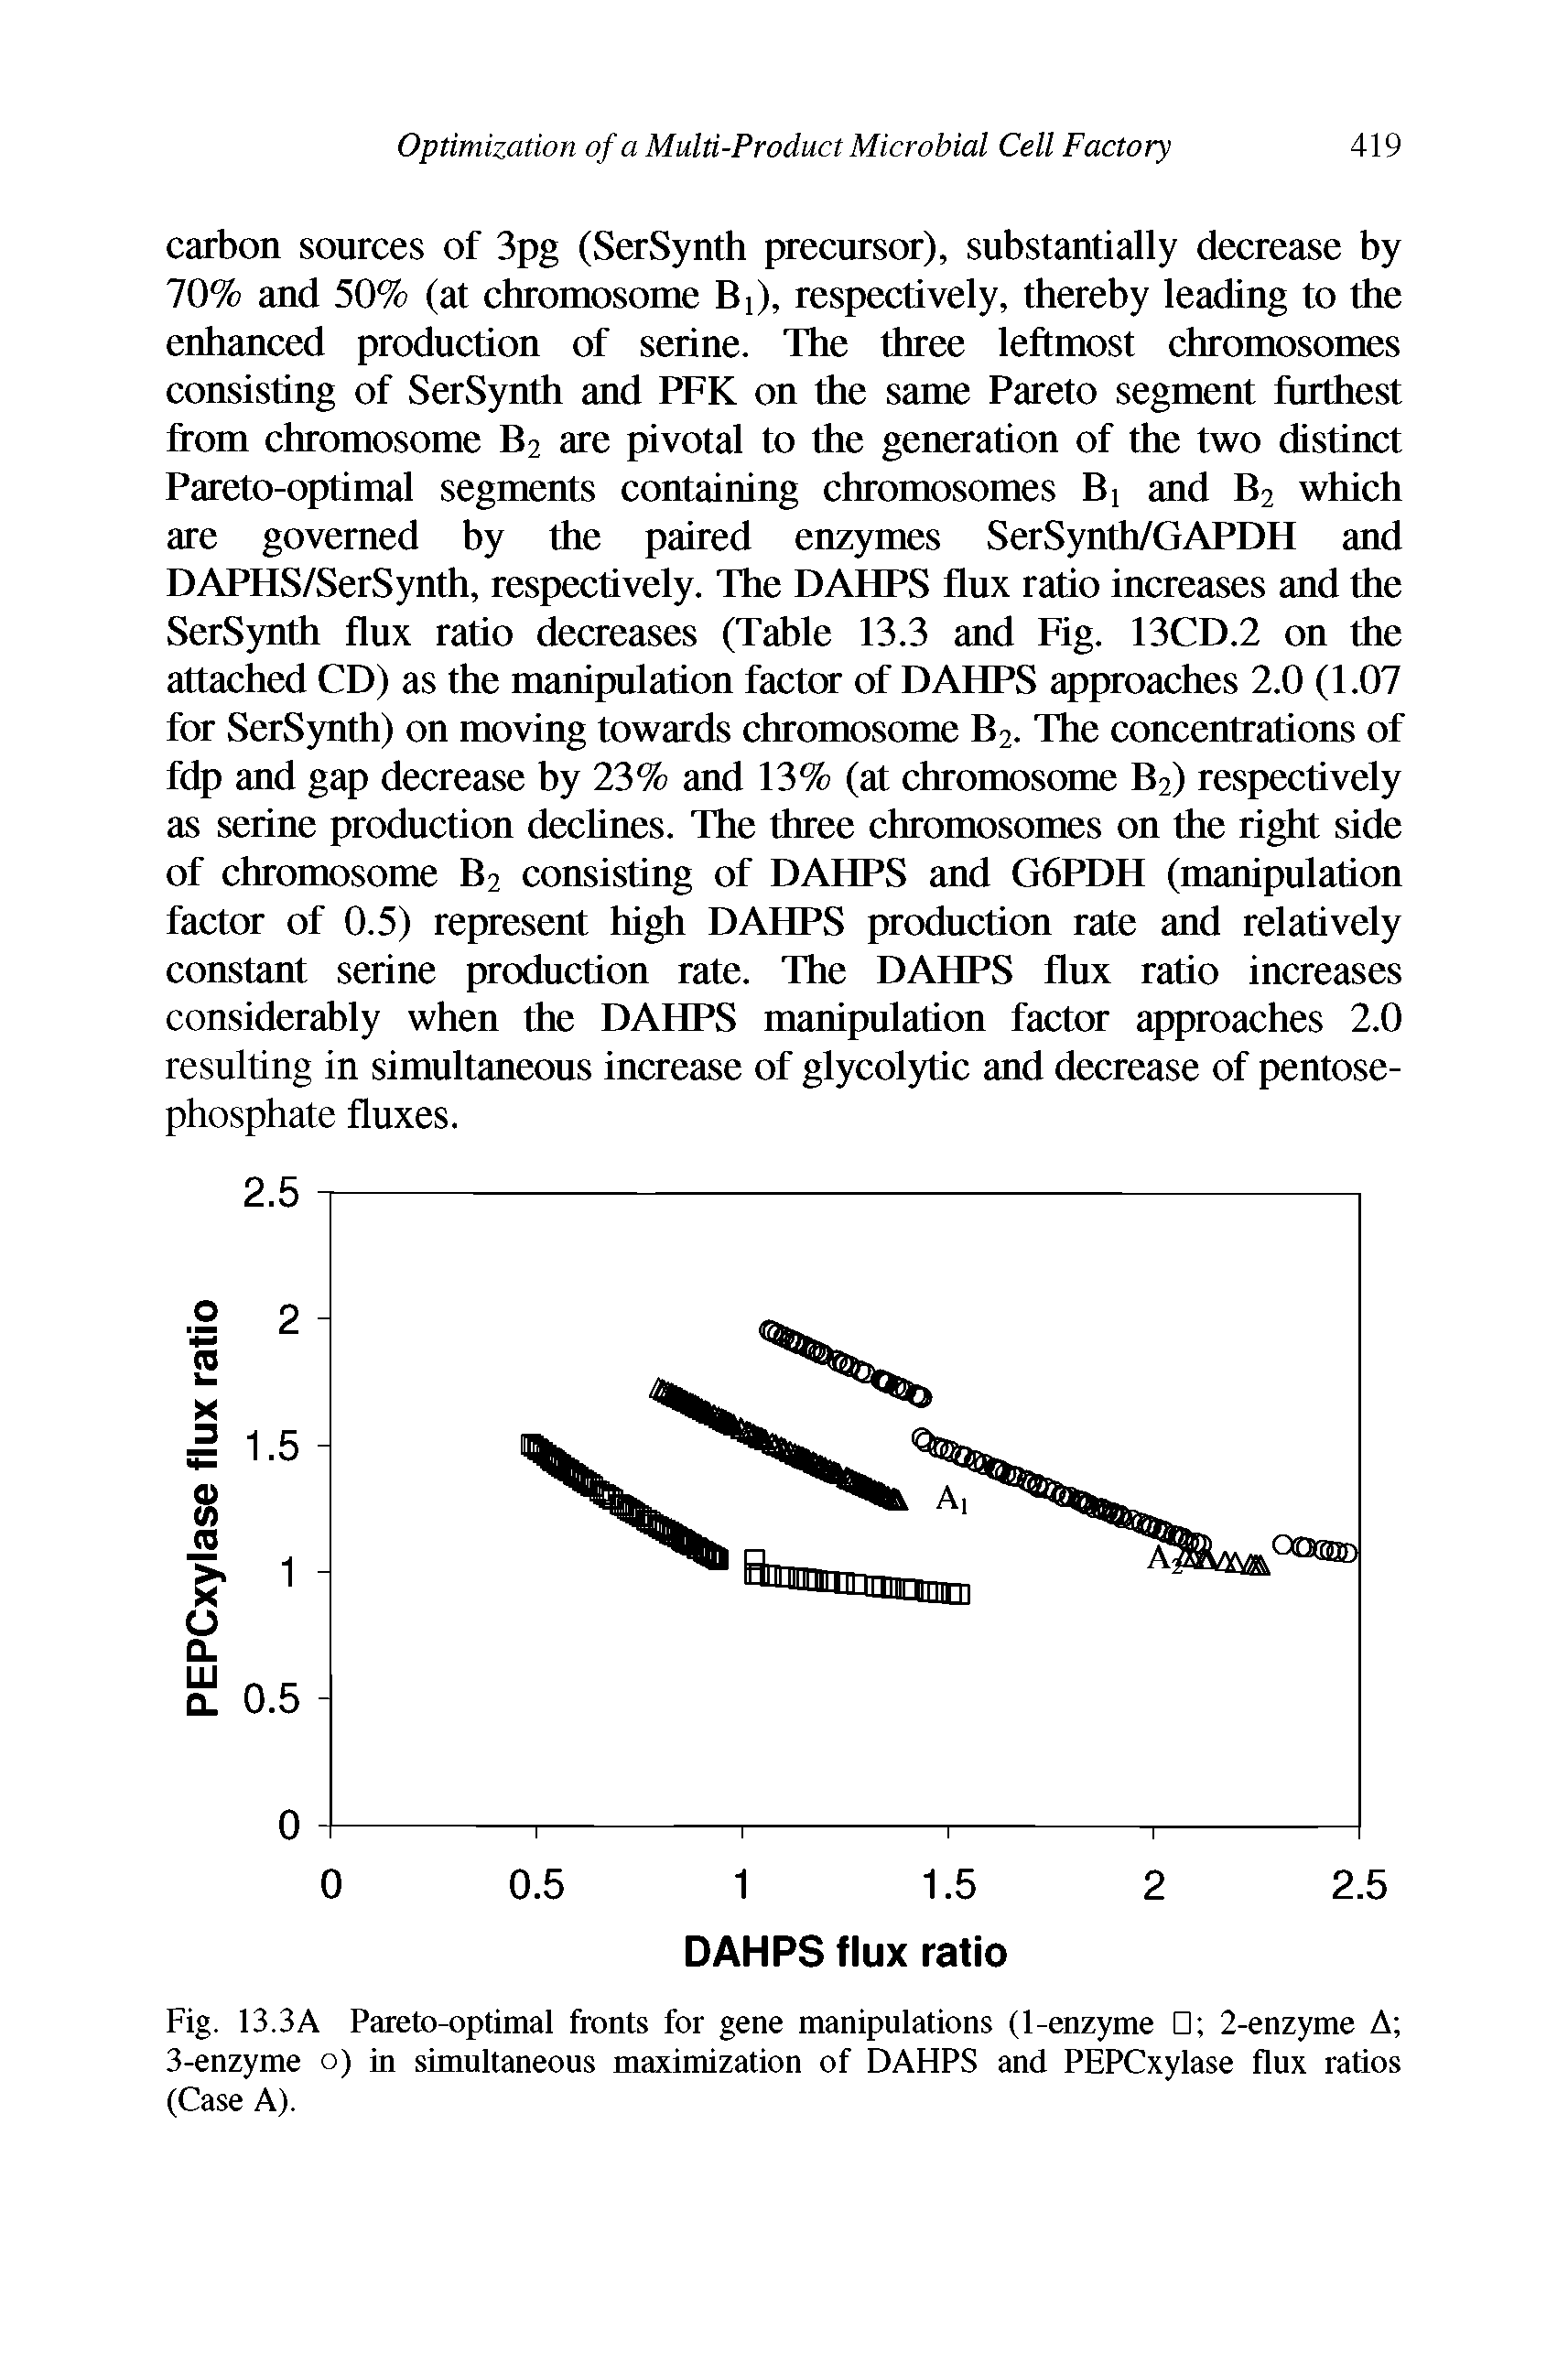 Fig. 13.3A Pareto-optimal fronts for gene manipulations (1-enzyme 2-enzyme A 3-enzyme o) in simultaneous maximization of DAHPS and PEPCxylase flux ratios (Case A).